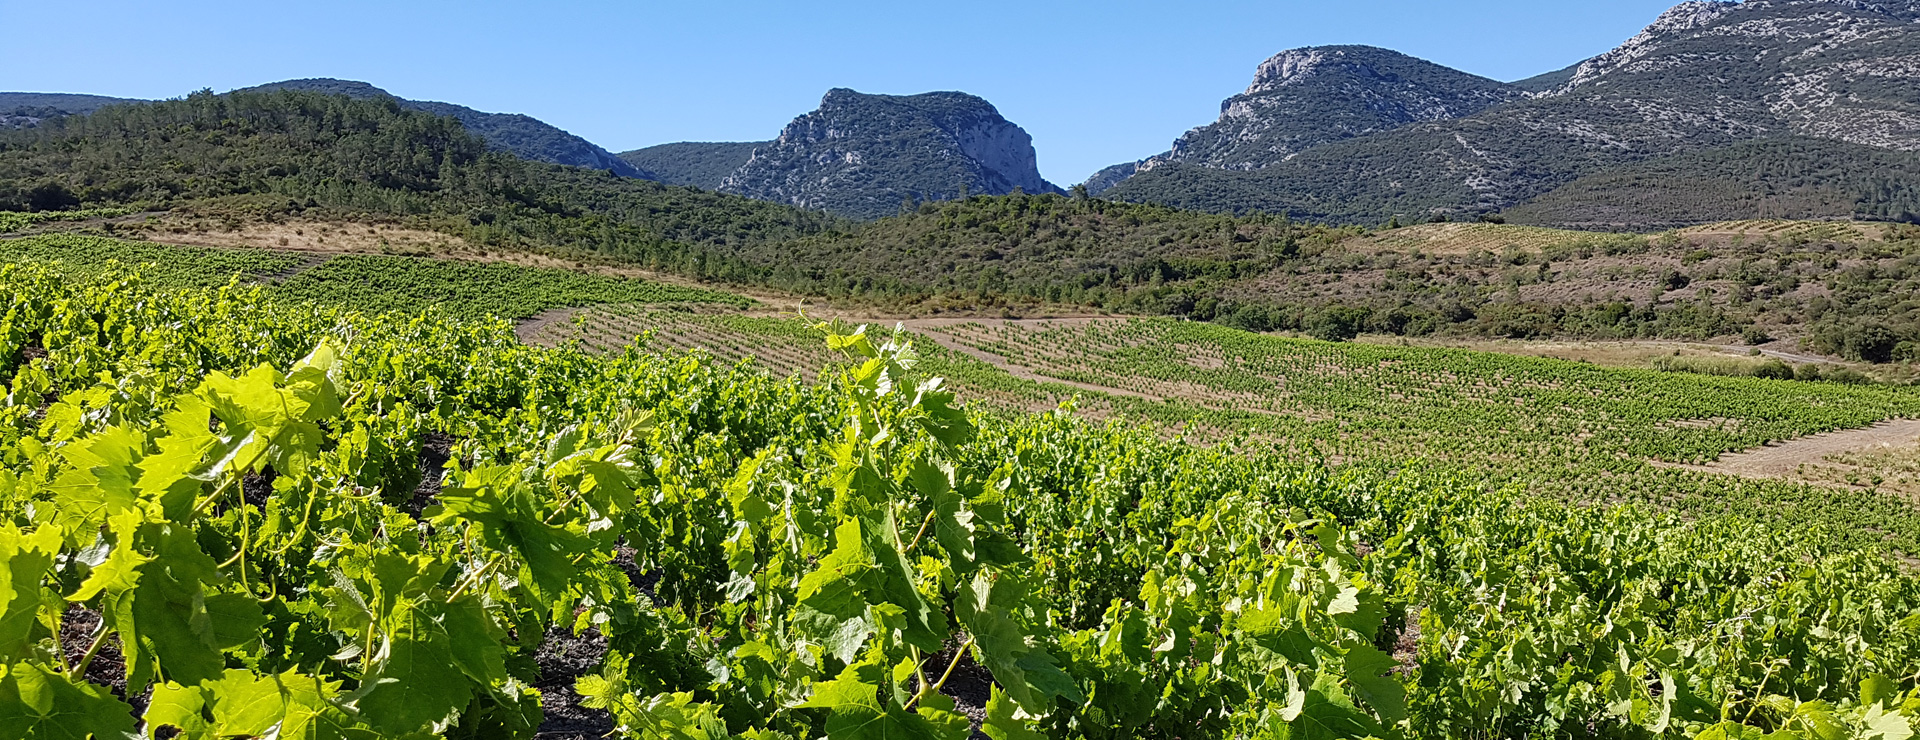 View of a vineyard in Languedoc-Roussillon